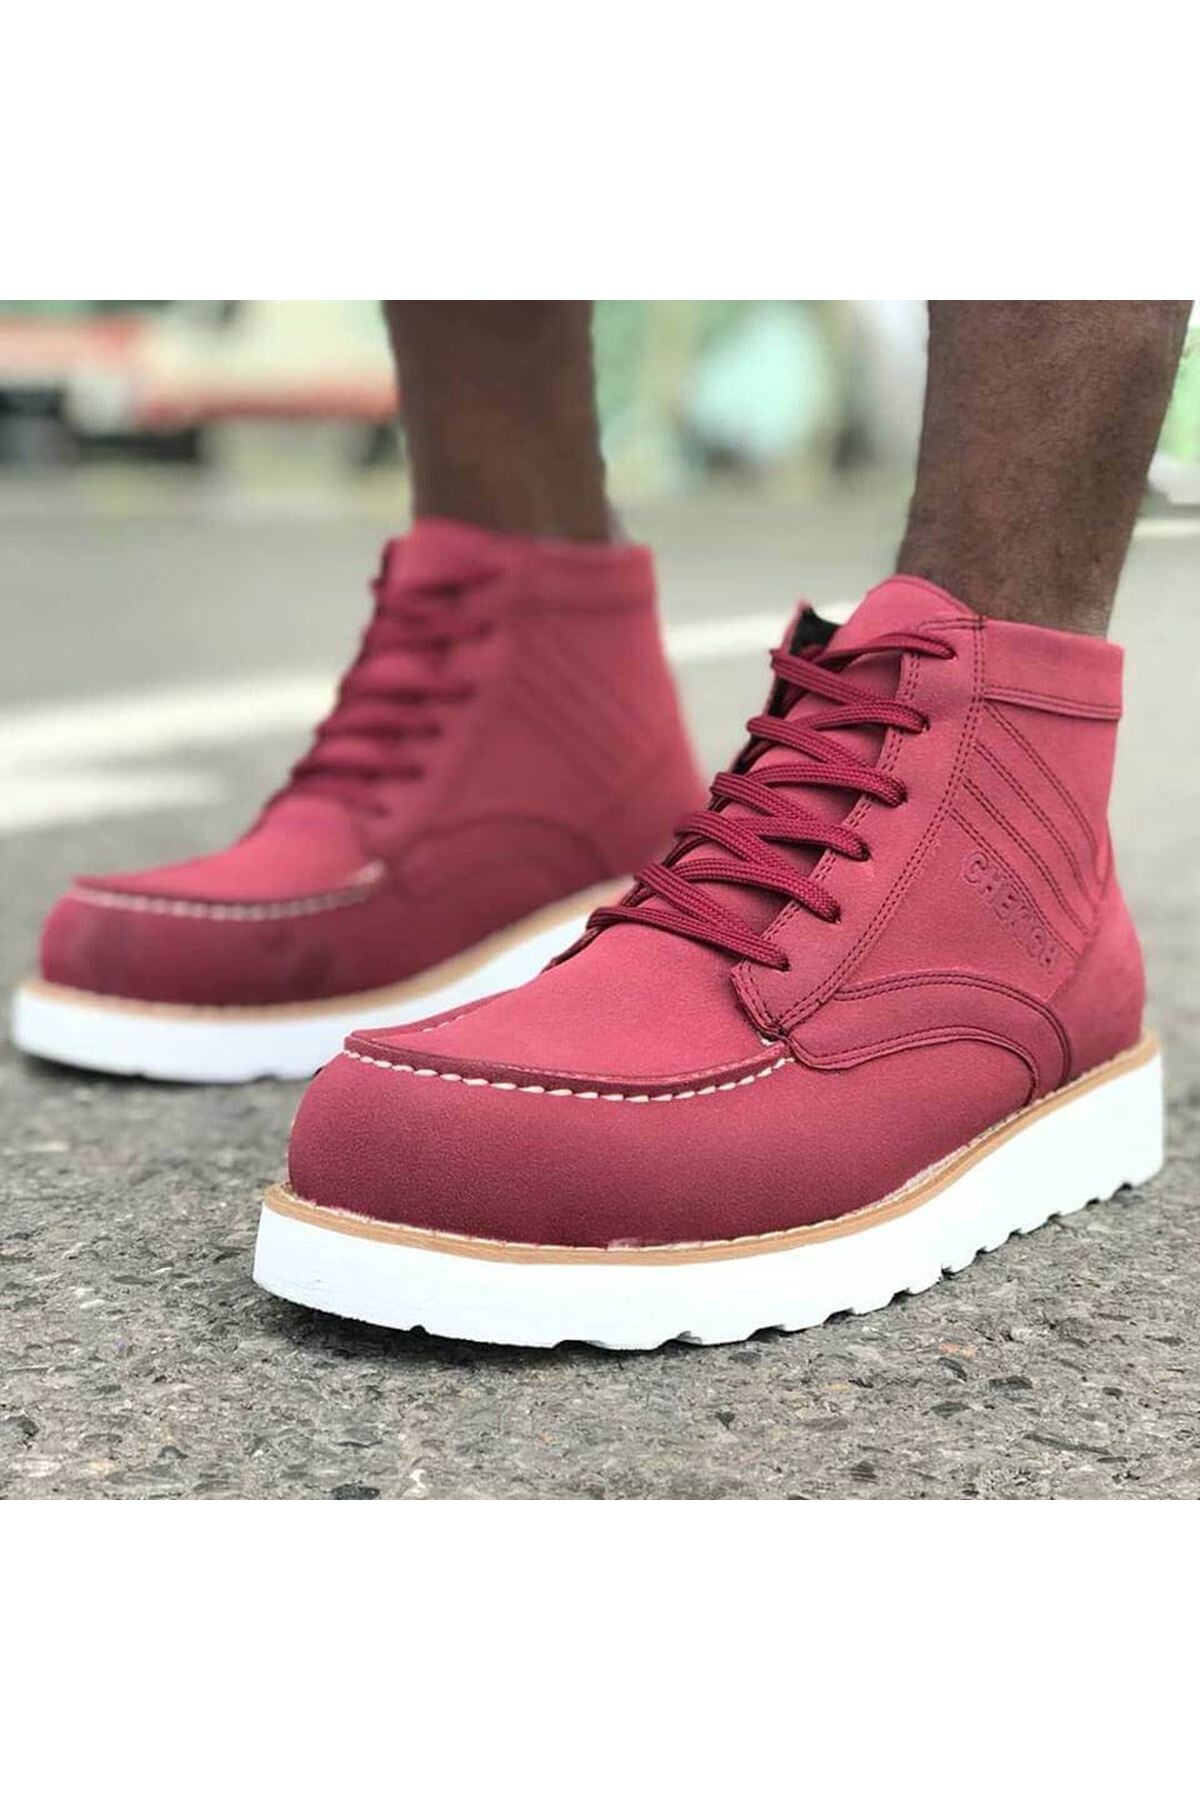 CH047 Men's Burgundy-White Sole Lace-Up Sneaker Sports Boots - STREETMODE ™